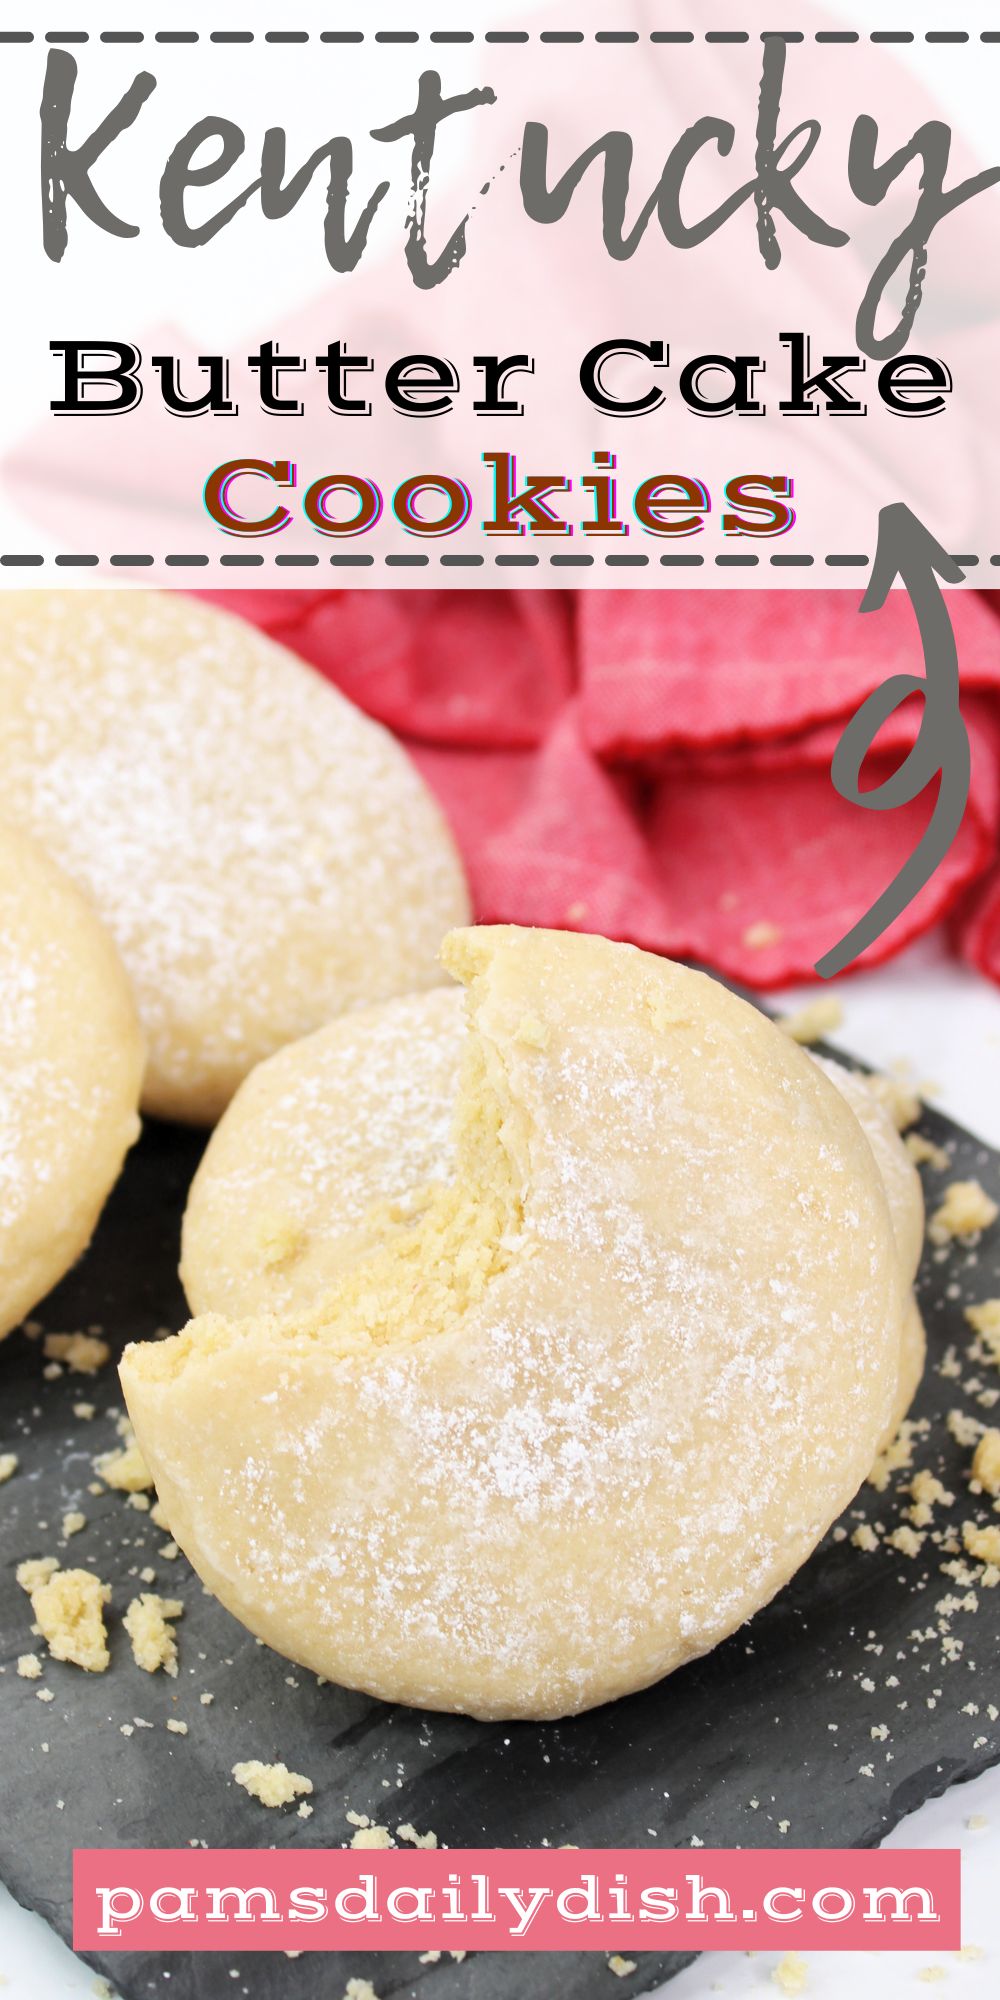 These Kentucky Butter Cake Cookies are soft and chewy and perfect to make when you want a sweet treat that will wow your friends and family. via @skinnydesserts